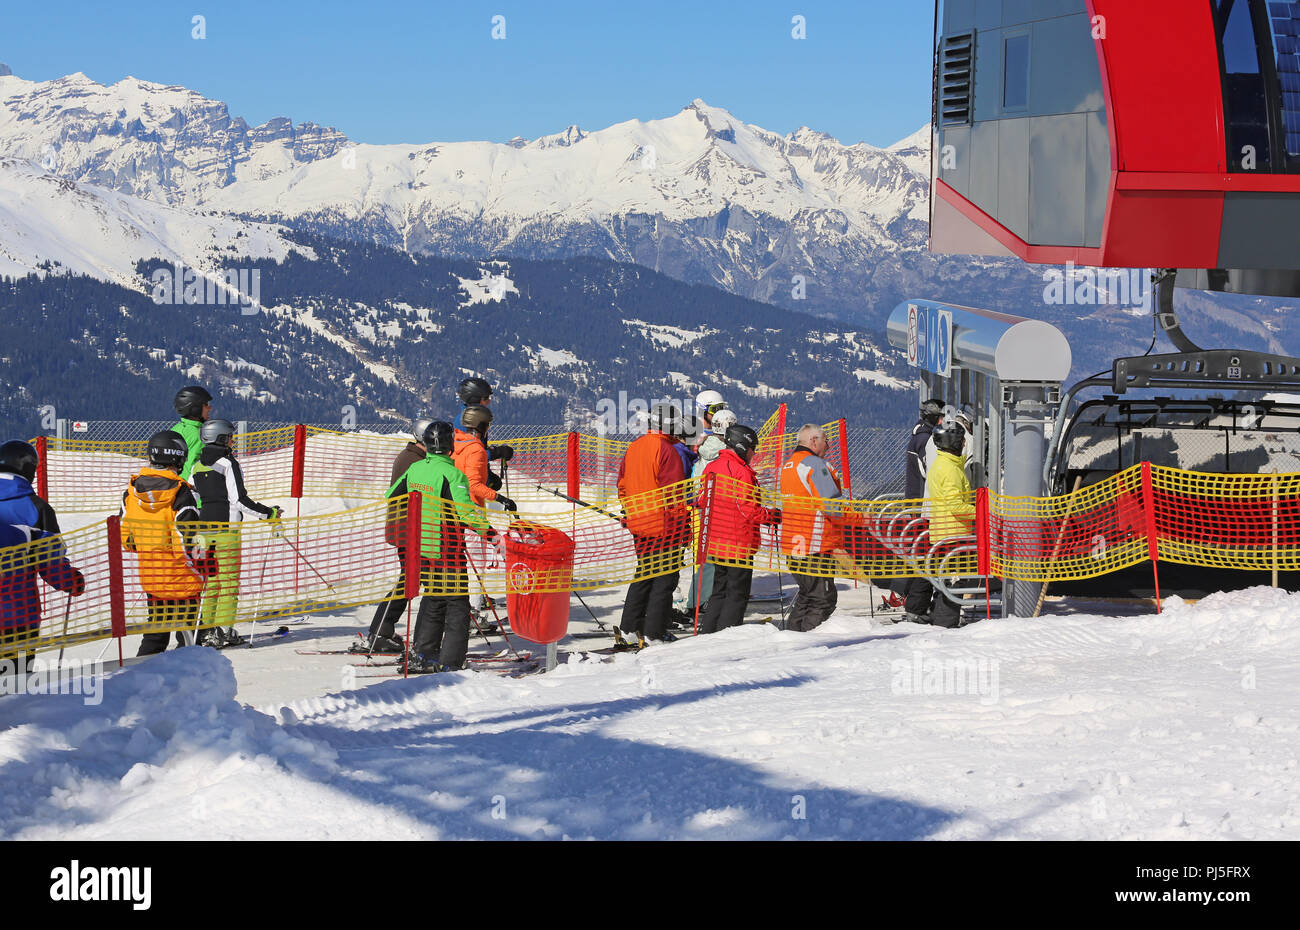 skier waiting in line for transport with lift Stock Photo